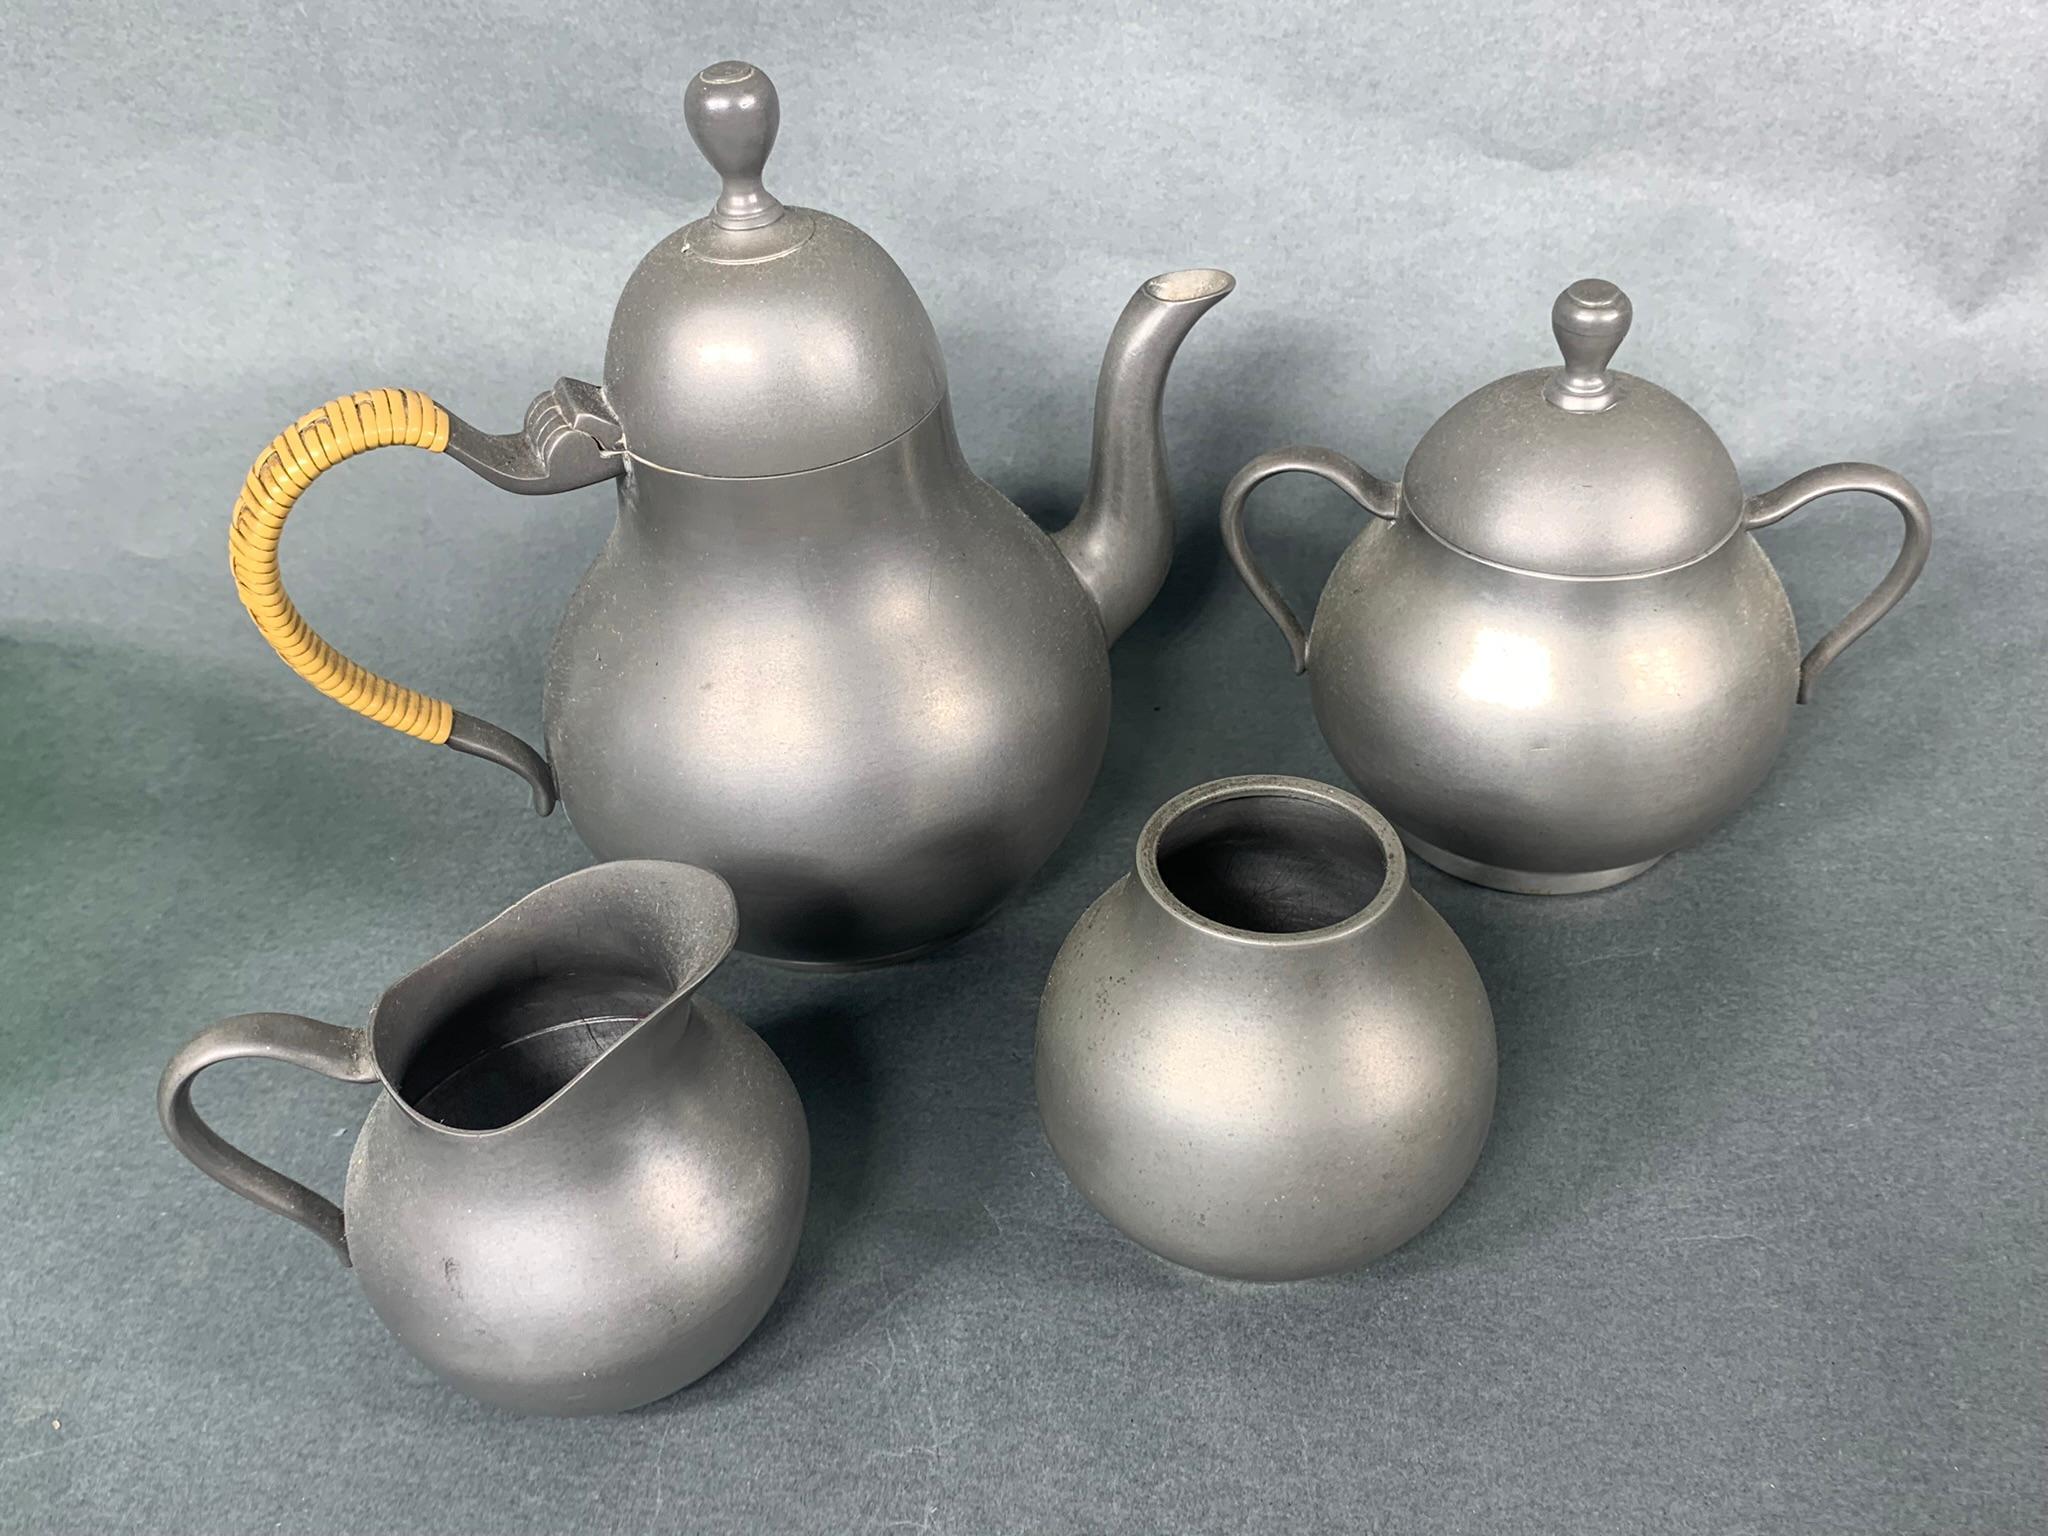 Group of Pewter Items - Trinket Box, Tea Pot, Cream, Sugar and More